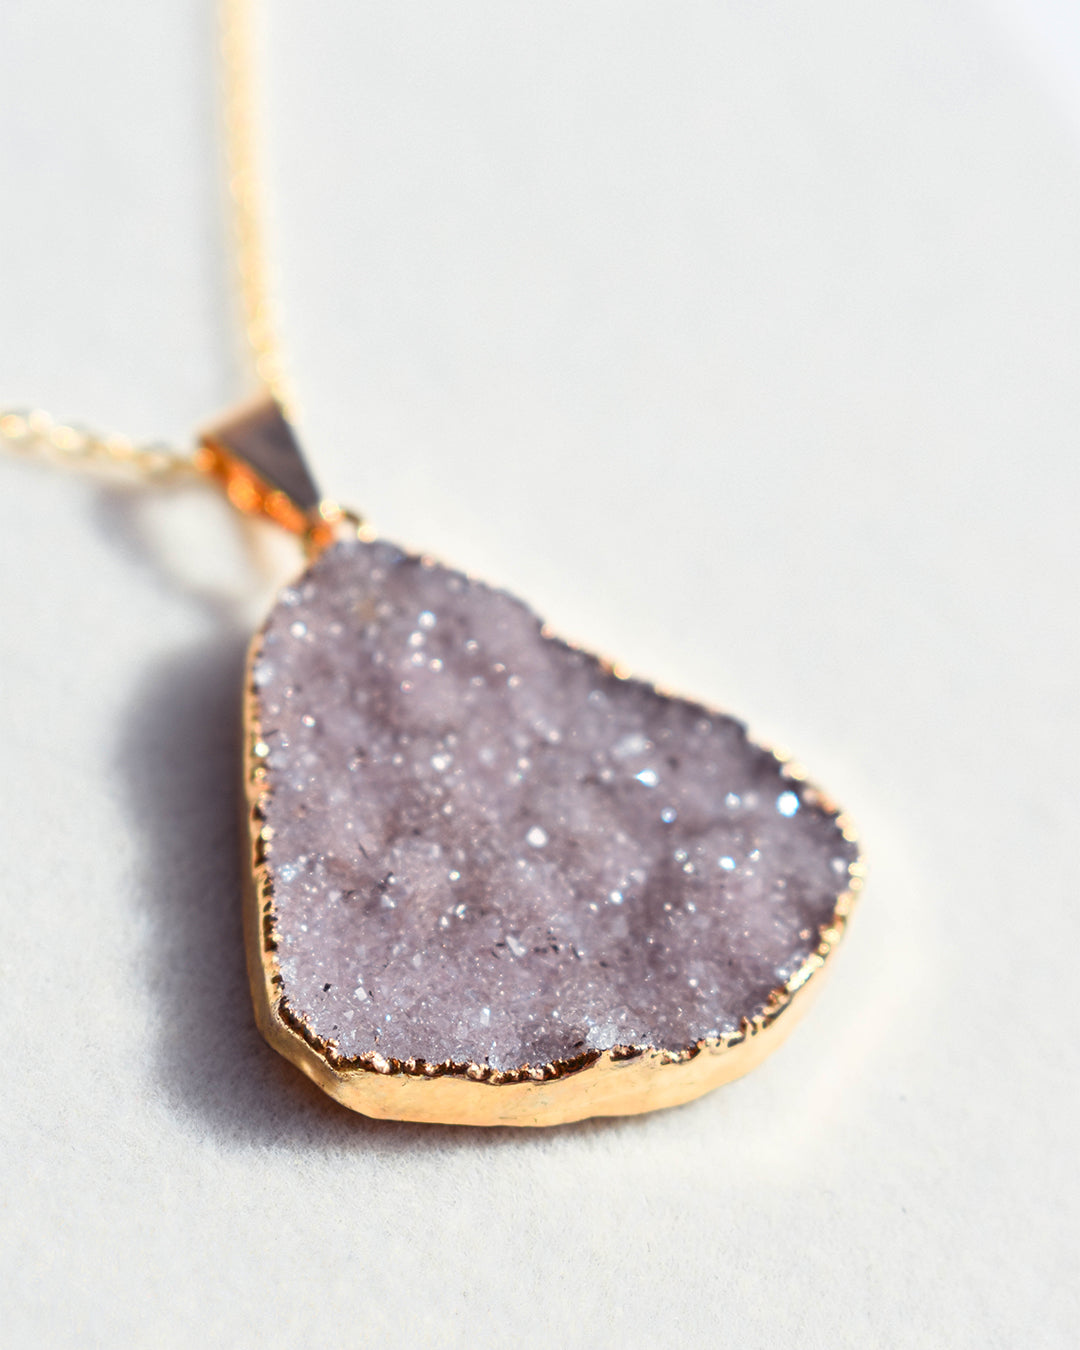 Gold plated chain with Agate crystal pendant